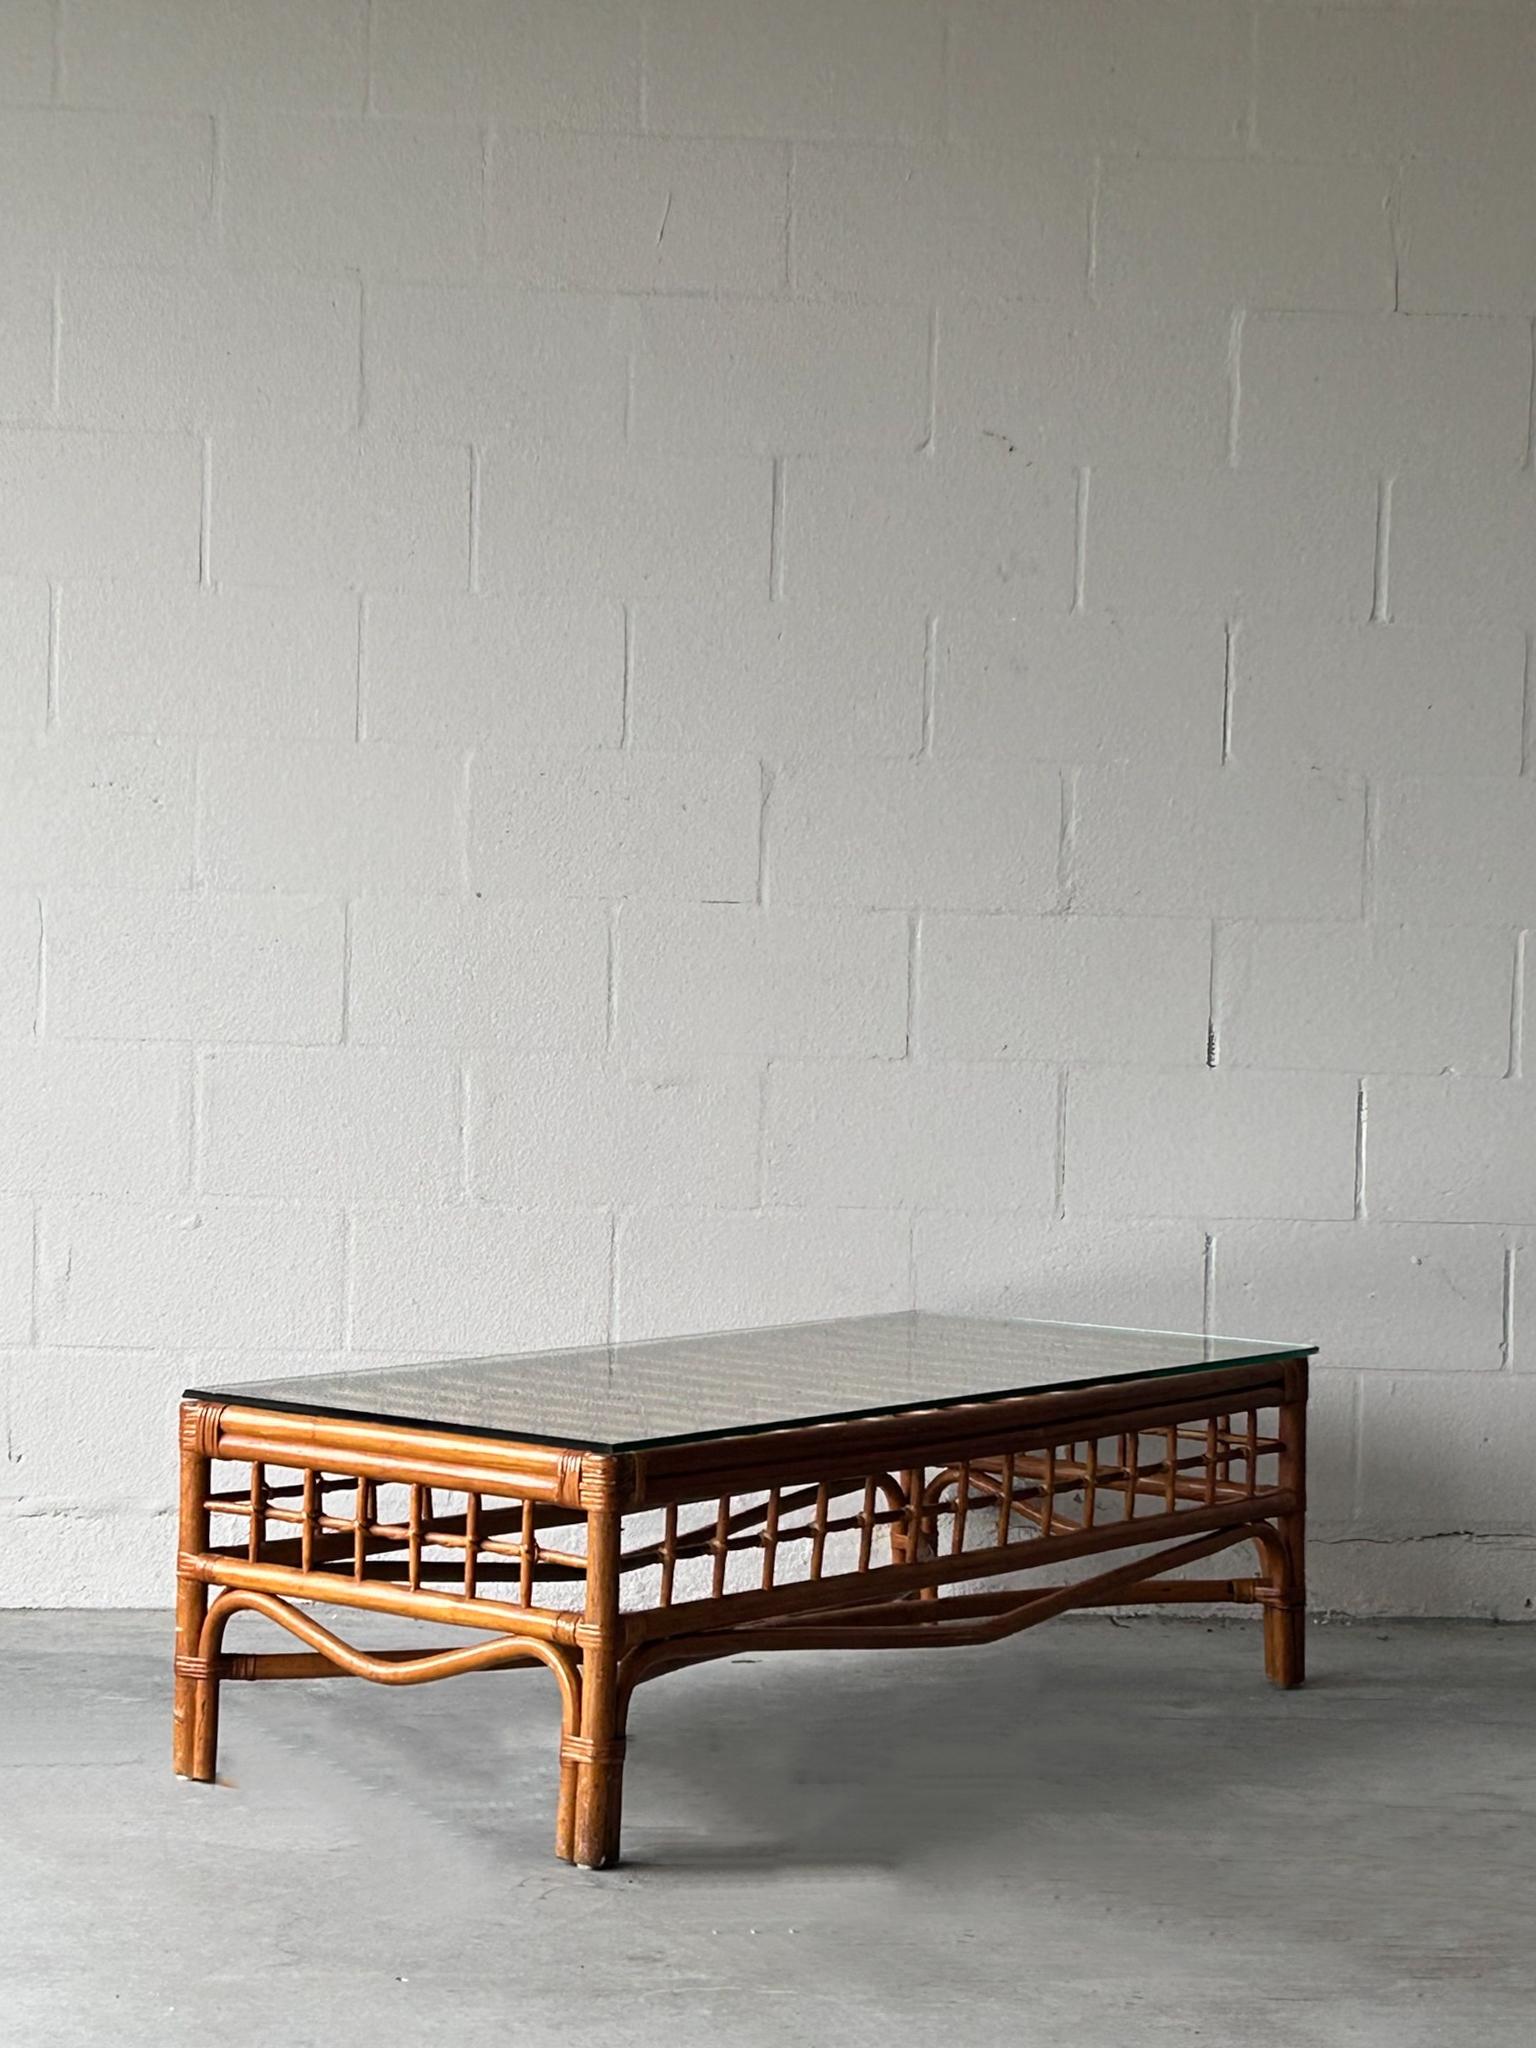 American Low Profile Woven Bamboo Coffee Table For Sale